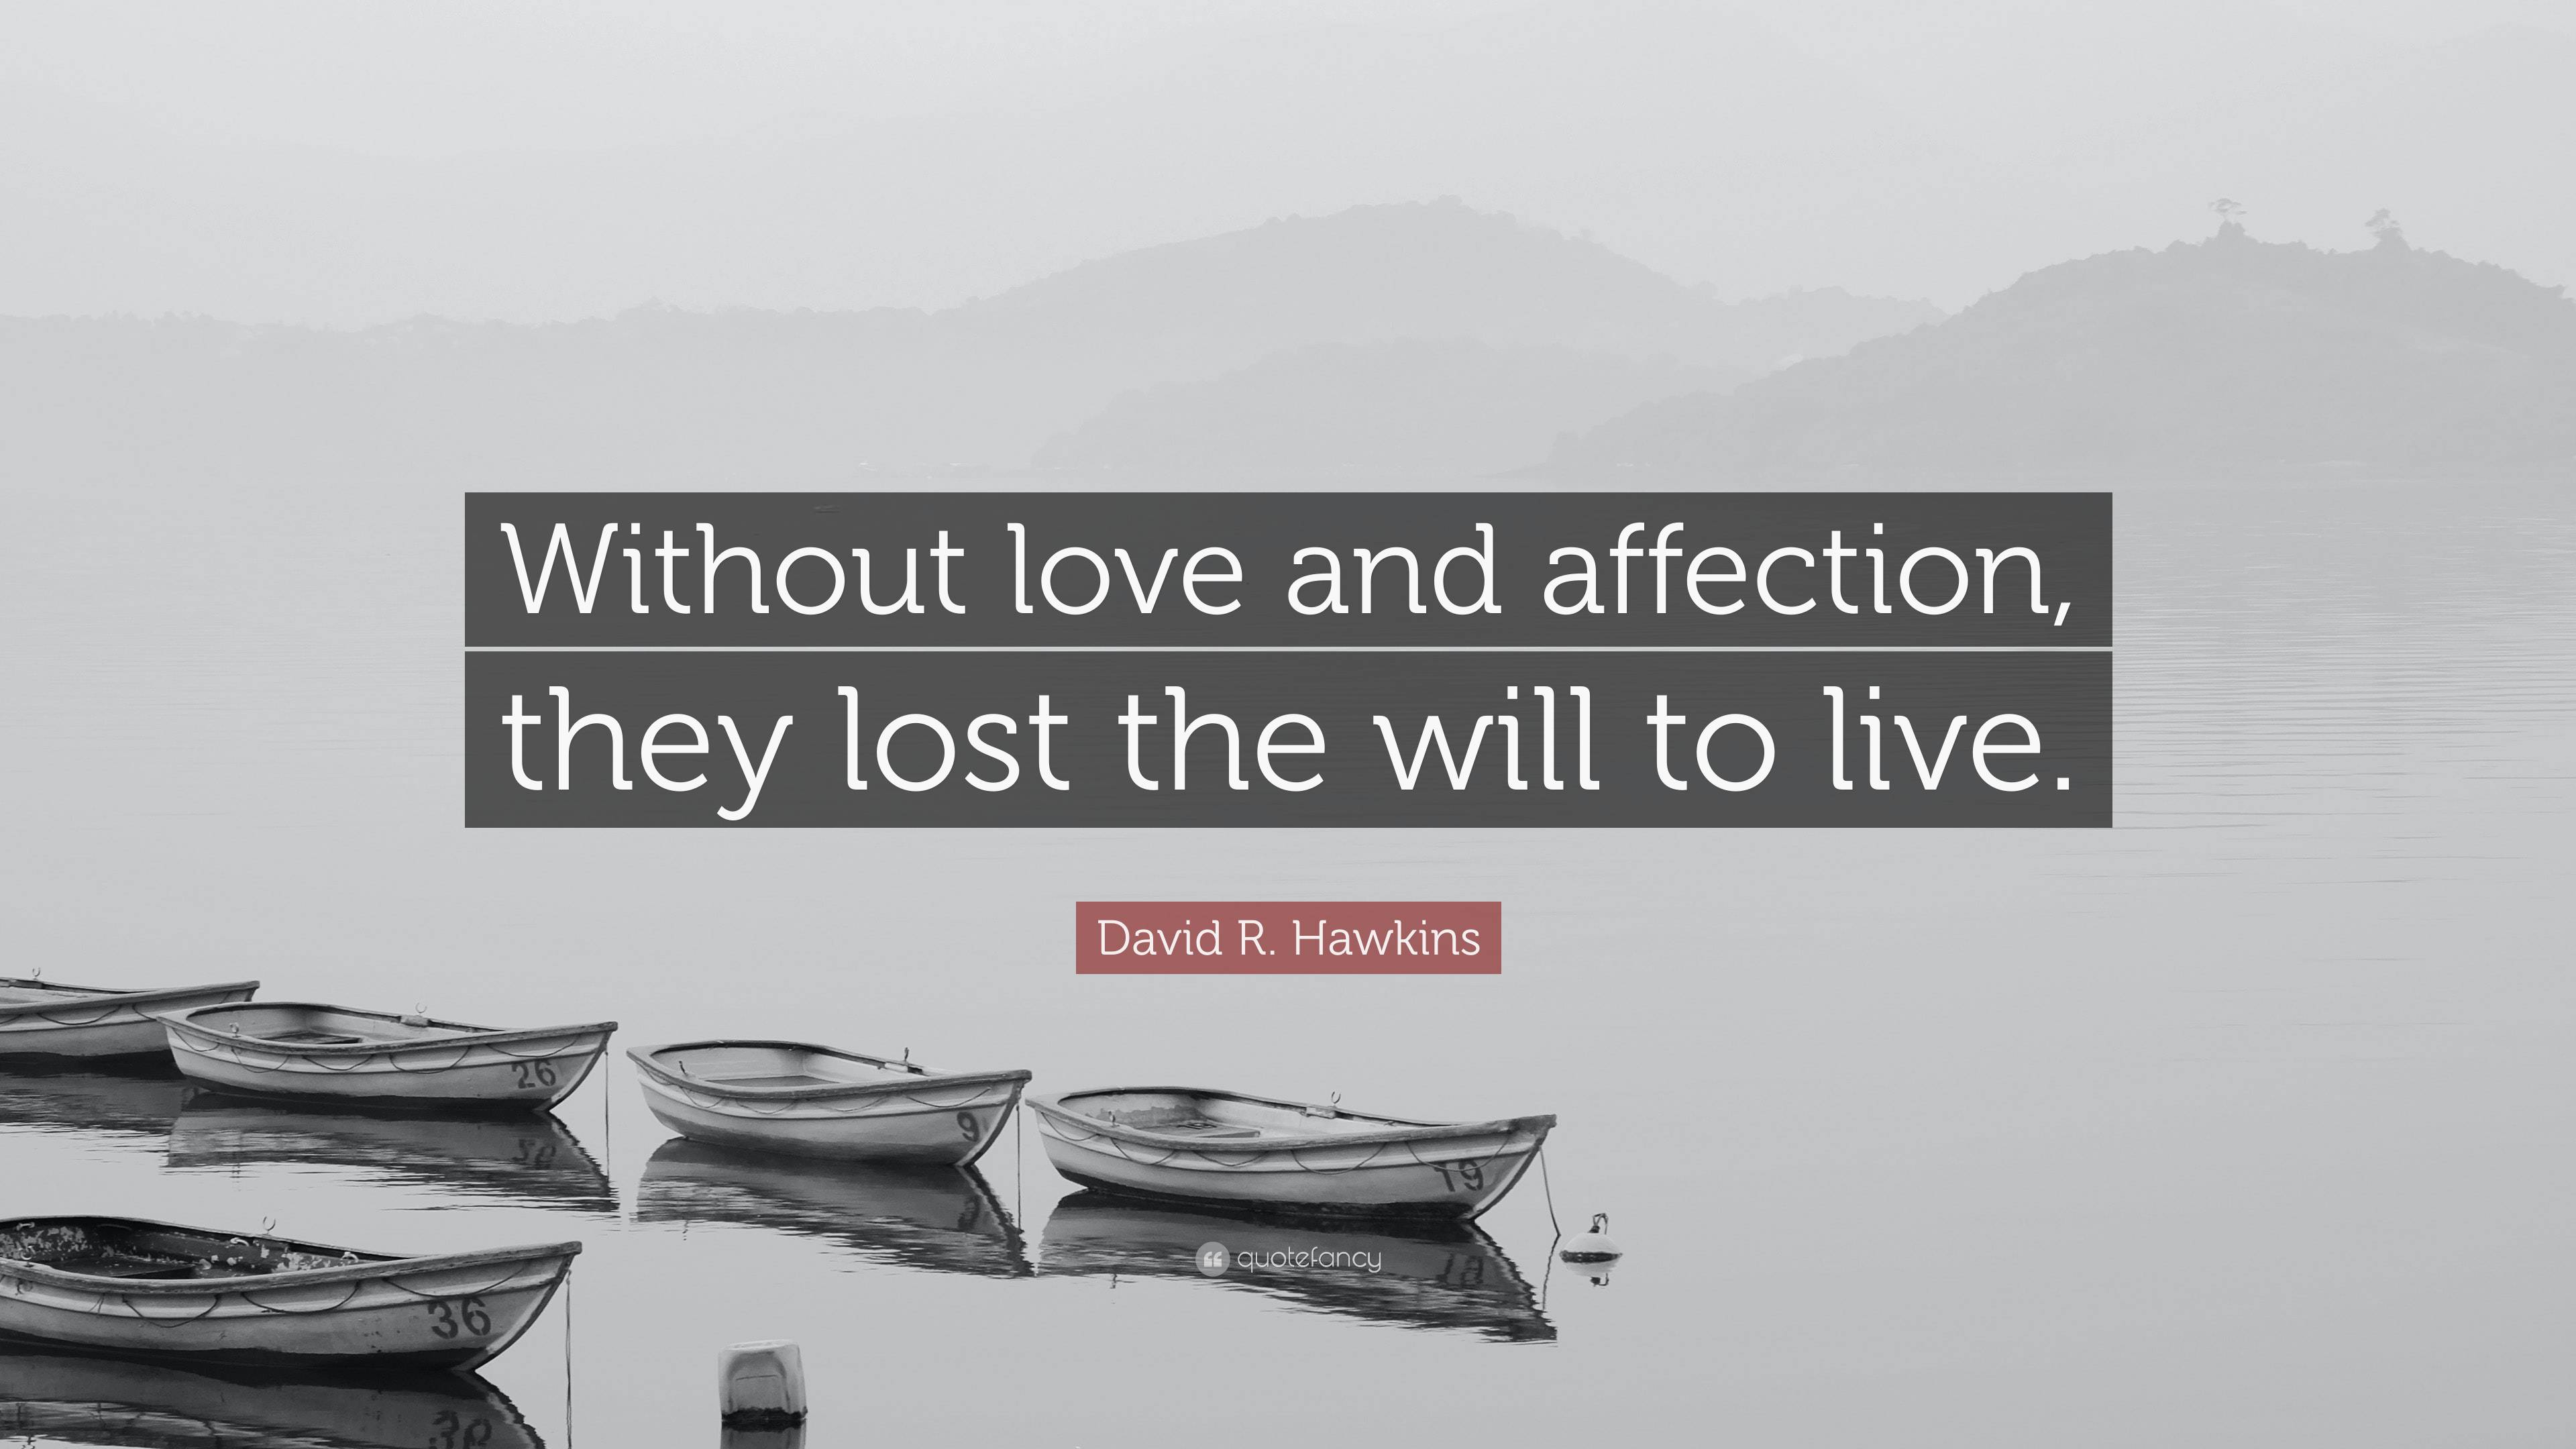 David R. Hawkins Quote: “Without love and affection, they lost the will to  live.”